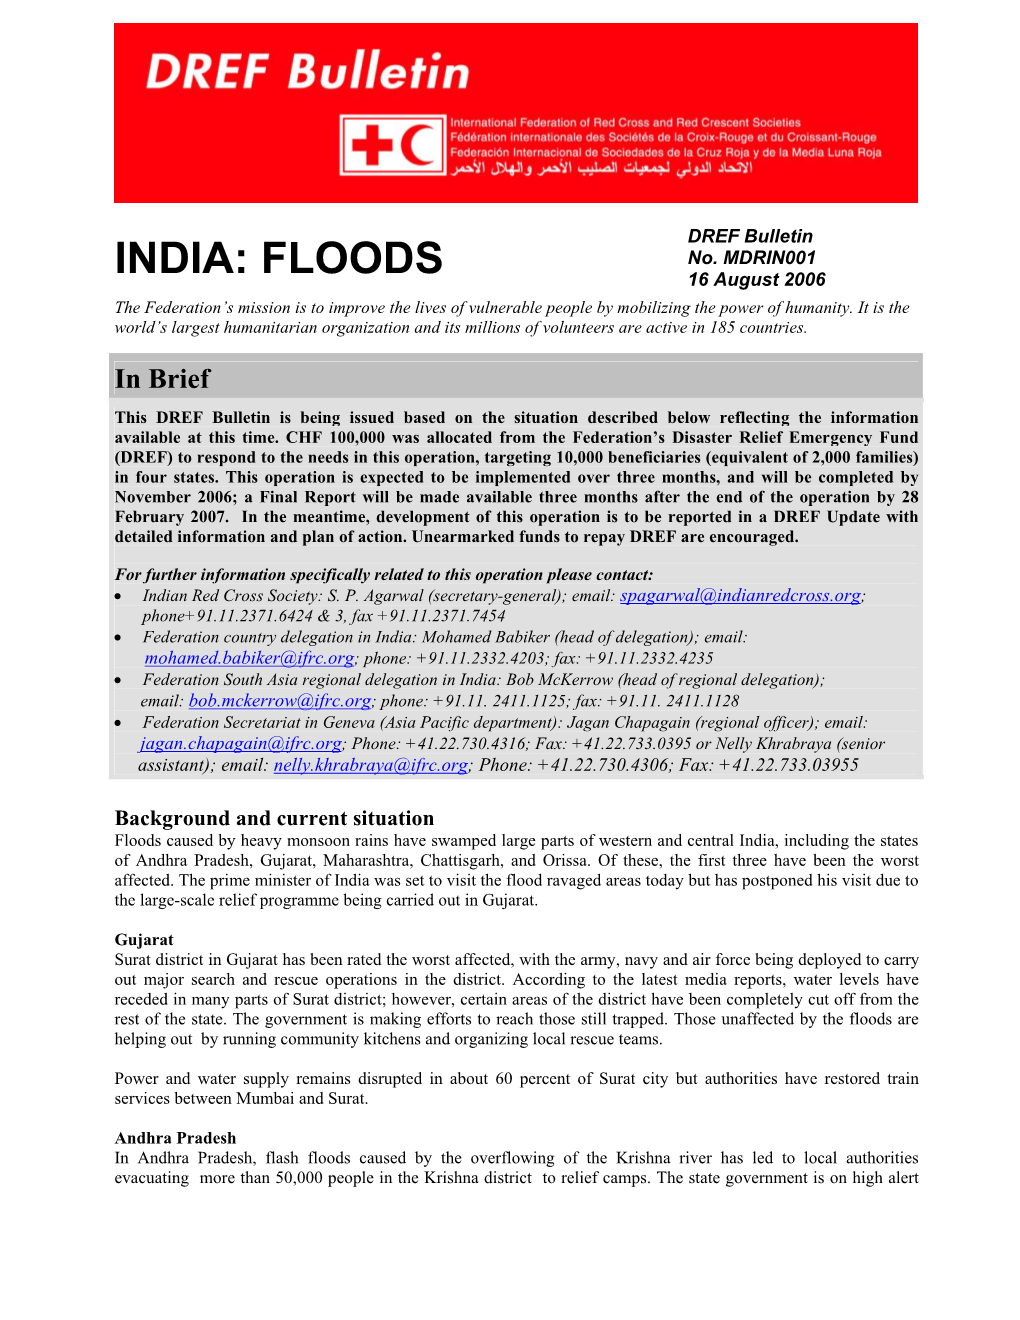 INDIA: FLOODS 16 August 2006 the Federation’S Mission Is to Improve the Lives of Vulnerable People by Mobilizing the Power of Humanity